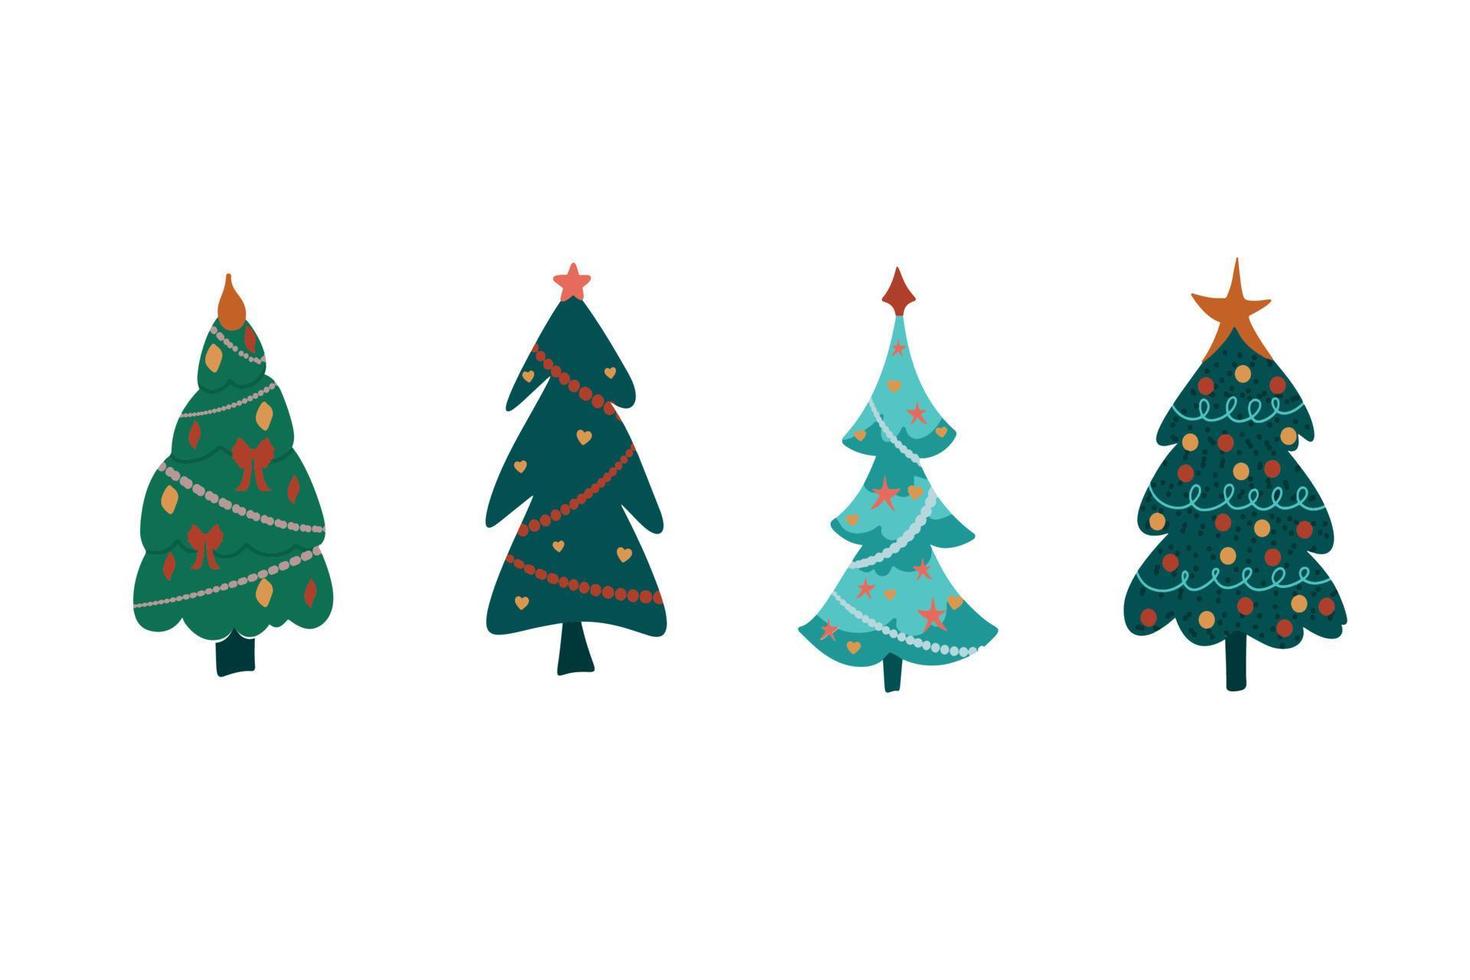 Set of cartoon Christmas trees, pines for greeting card, invitation, banner, web. New Years and xmas traditional symbol tree with garlands, light bulb, star. Winter holiday. Flat design, vector